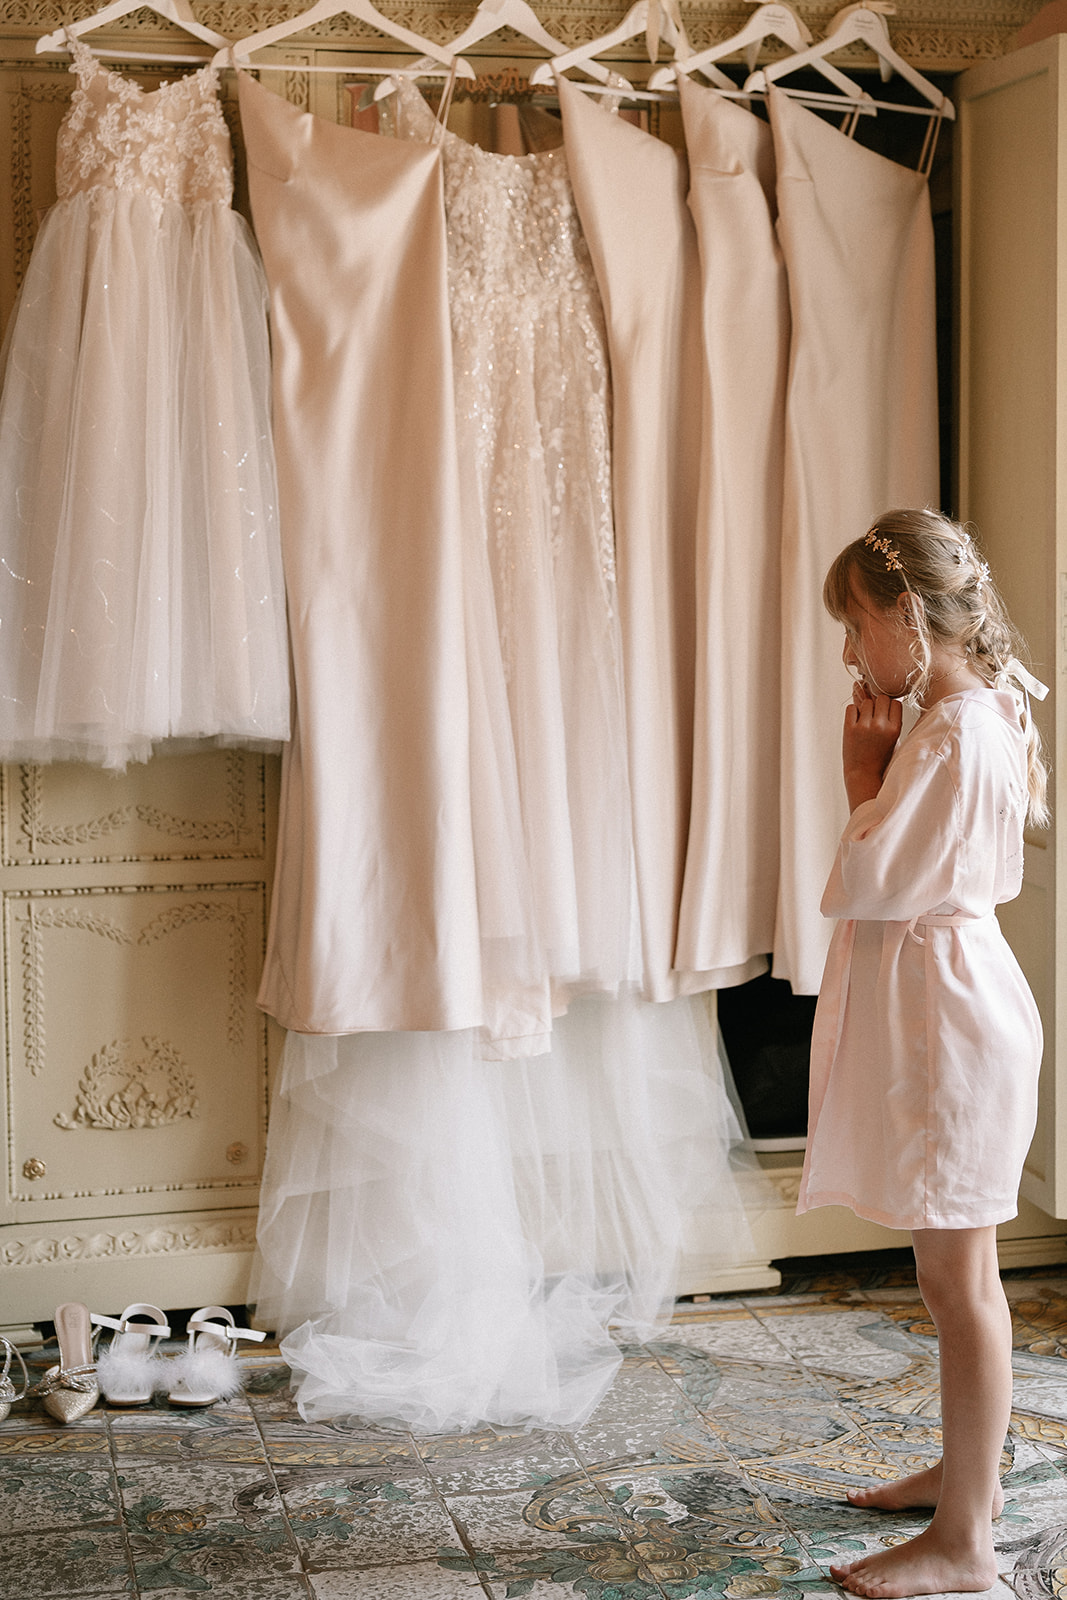 flower girl looking at bridal party dresses